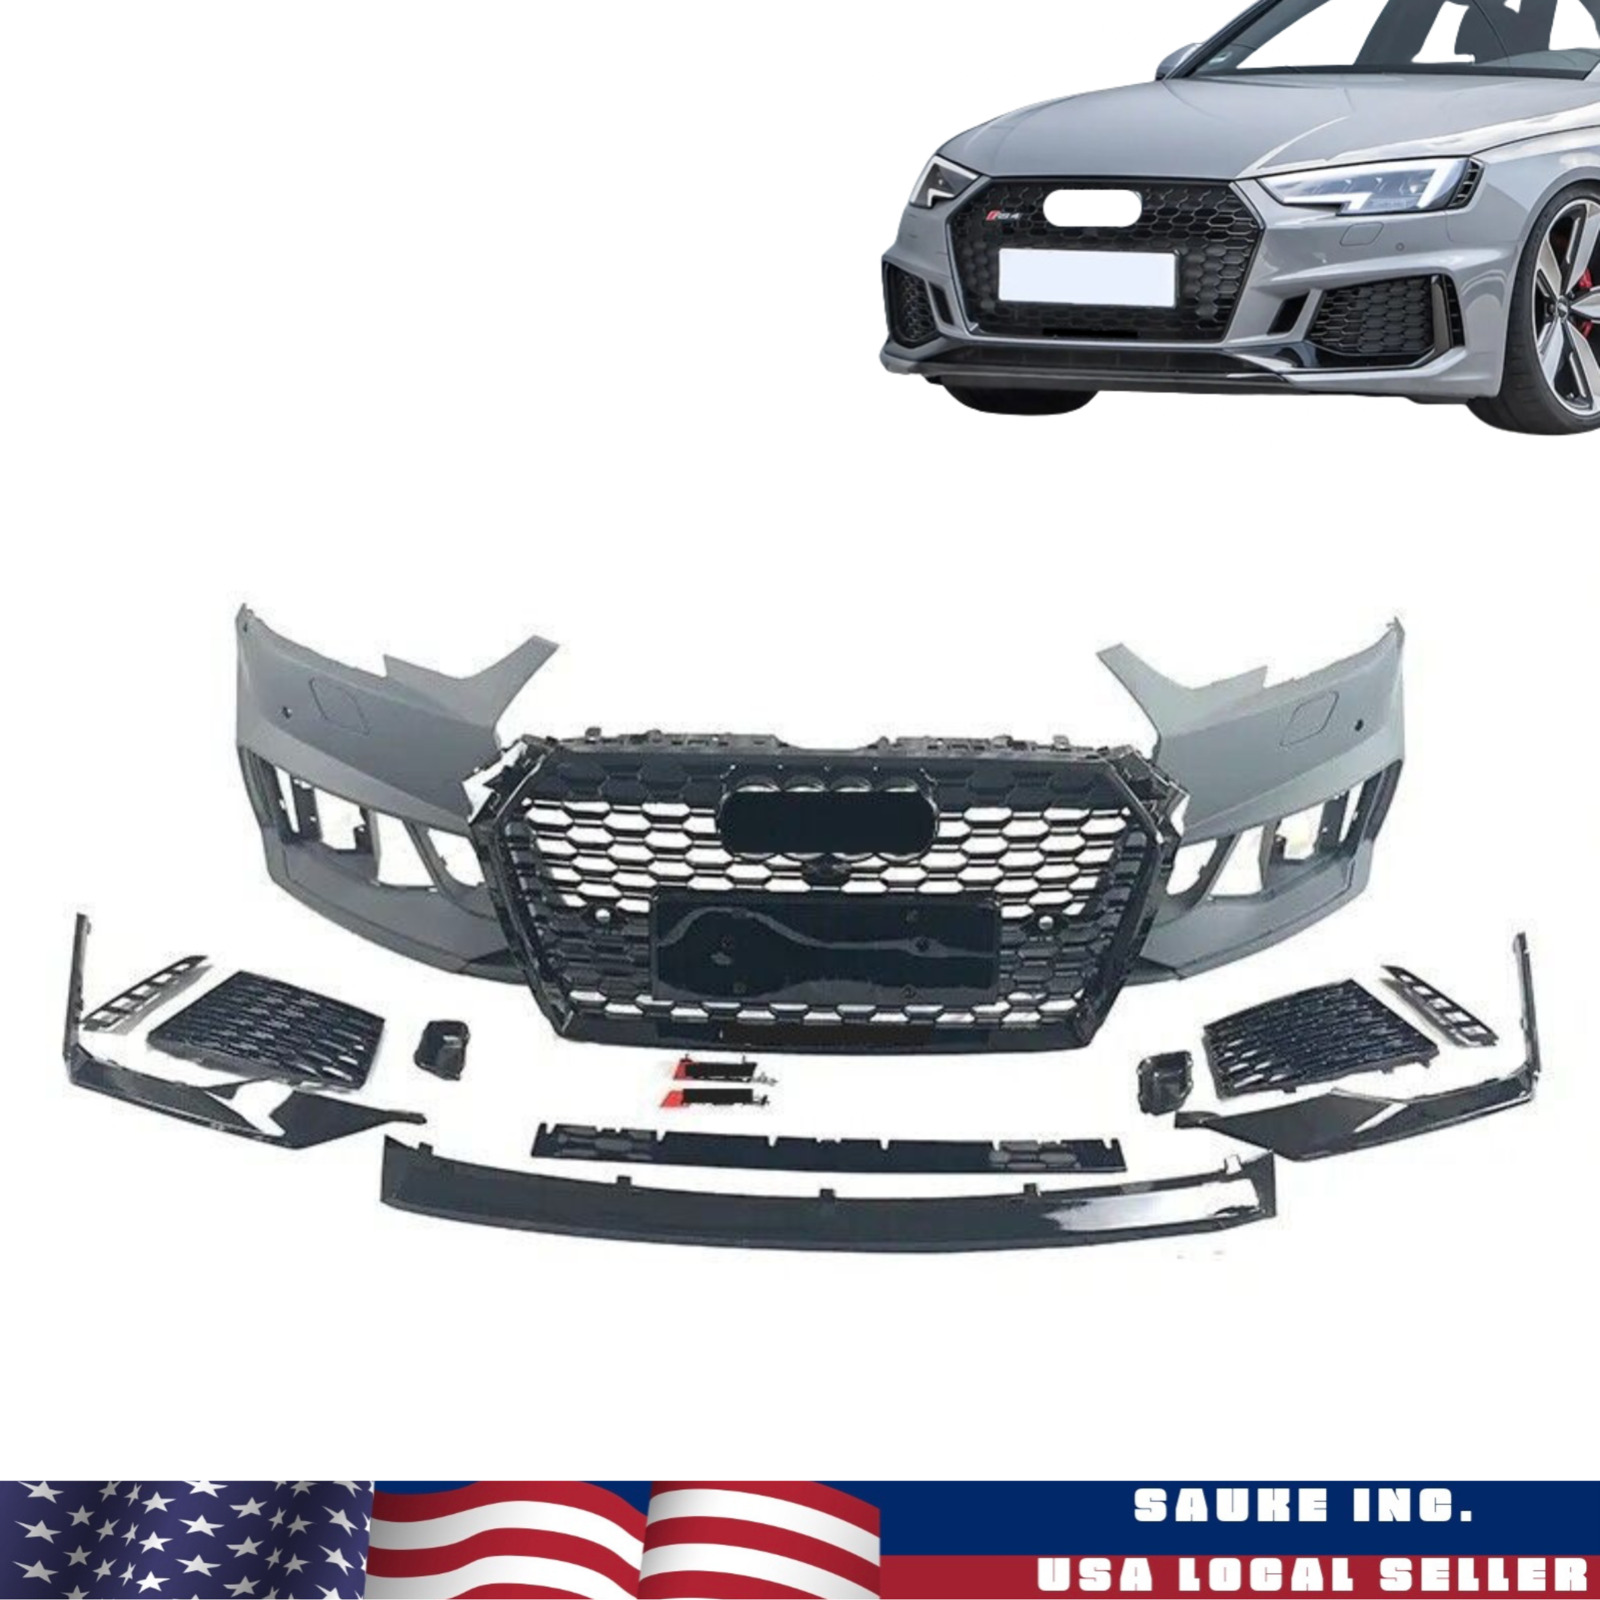 RS4 front bumper cover grille molding black gloss upgrade set for 2017- 19 A4 S4